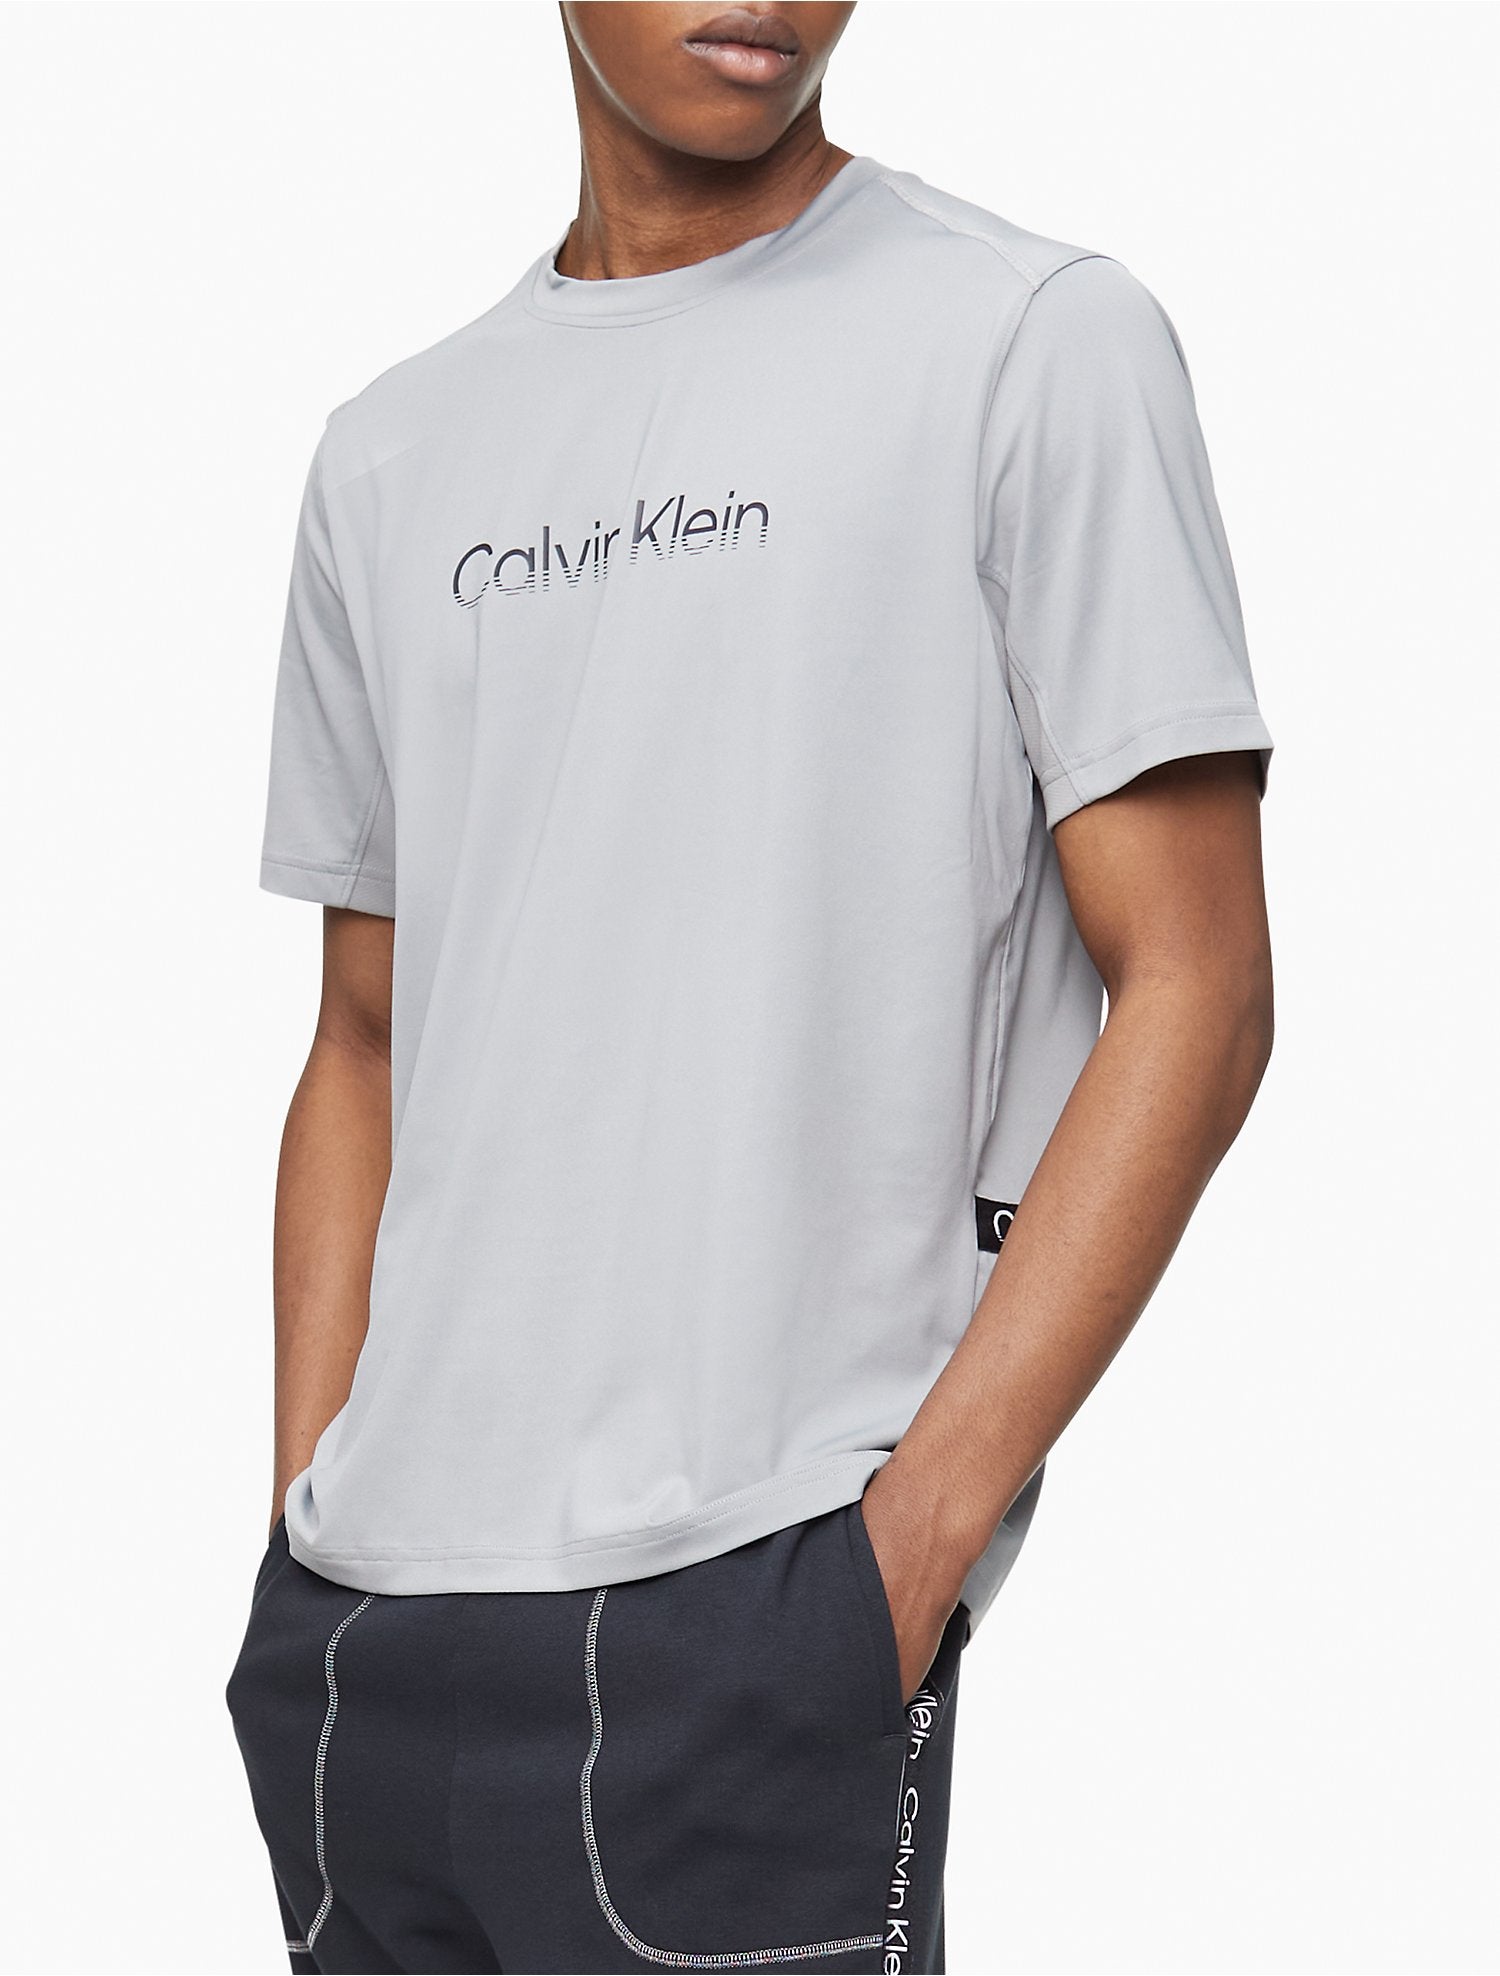 Calvin Klein T-Shirts for men - Buy now at